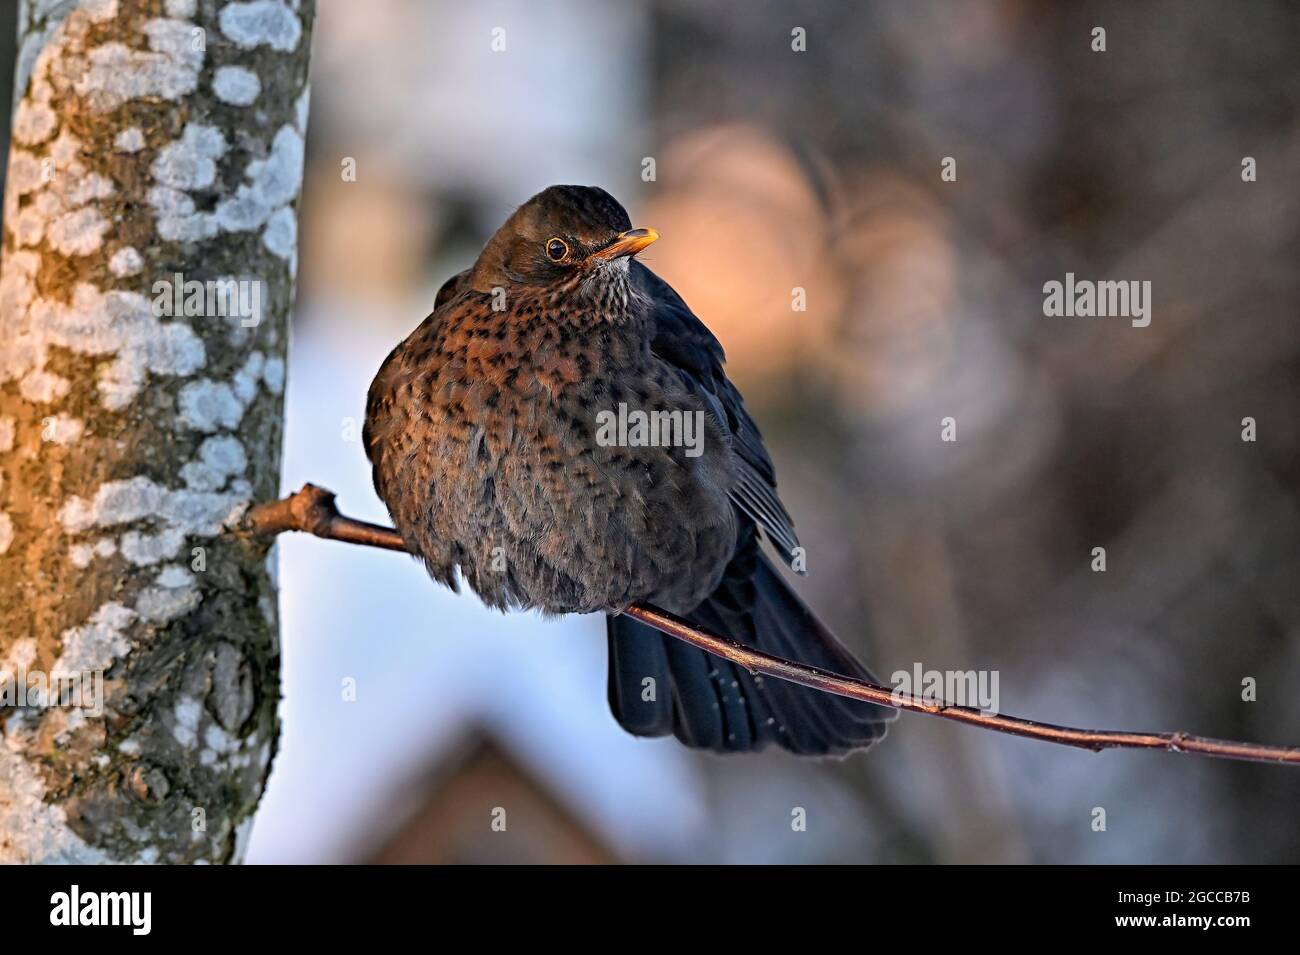 Blackbird is freezing in cold winter weather Stock Photo